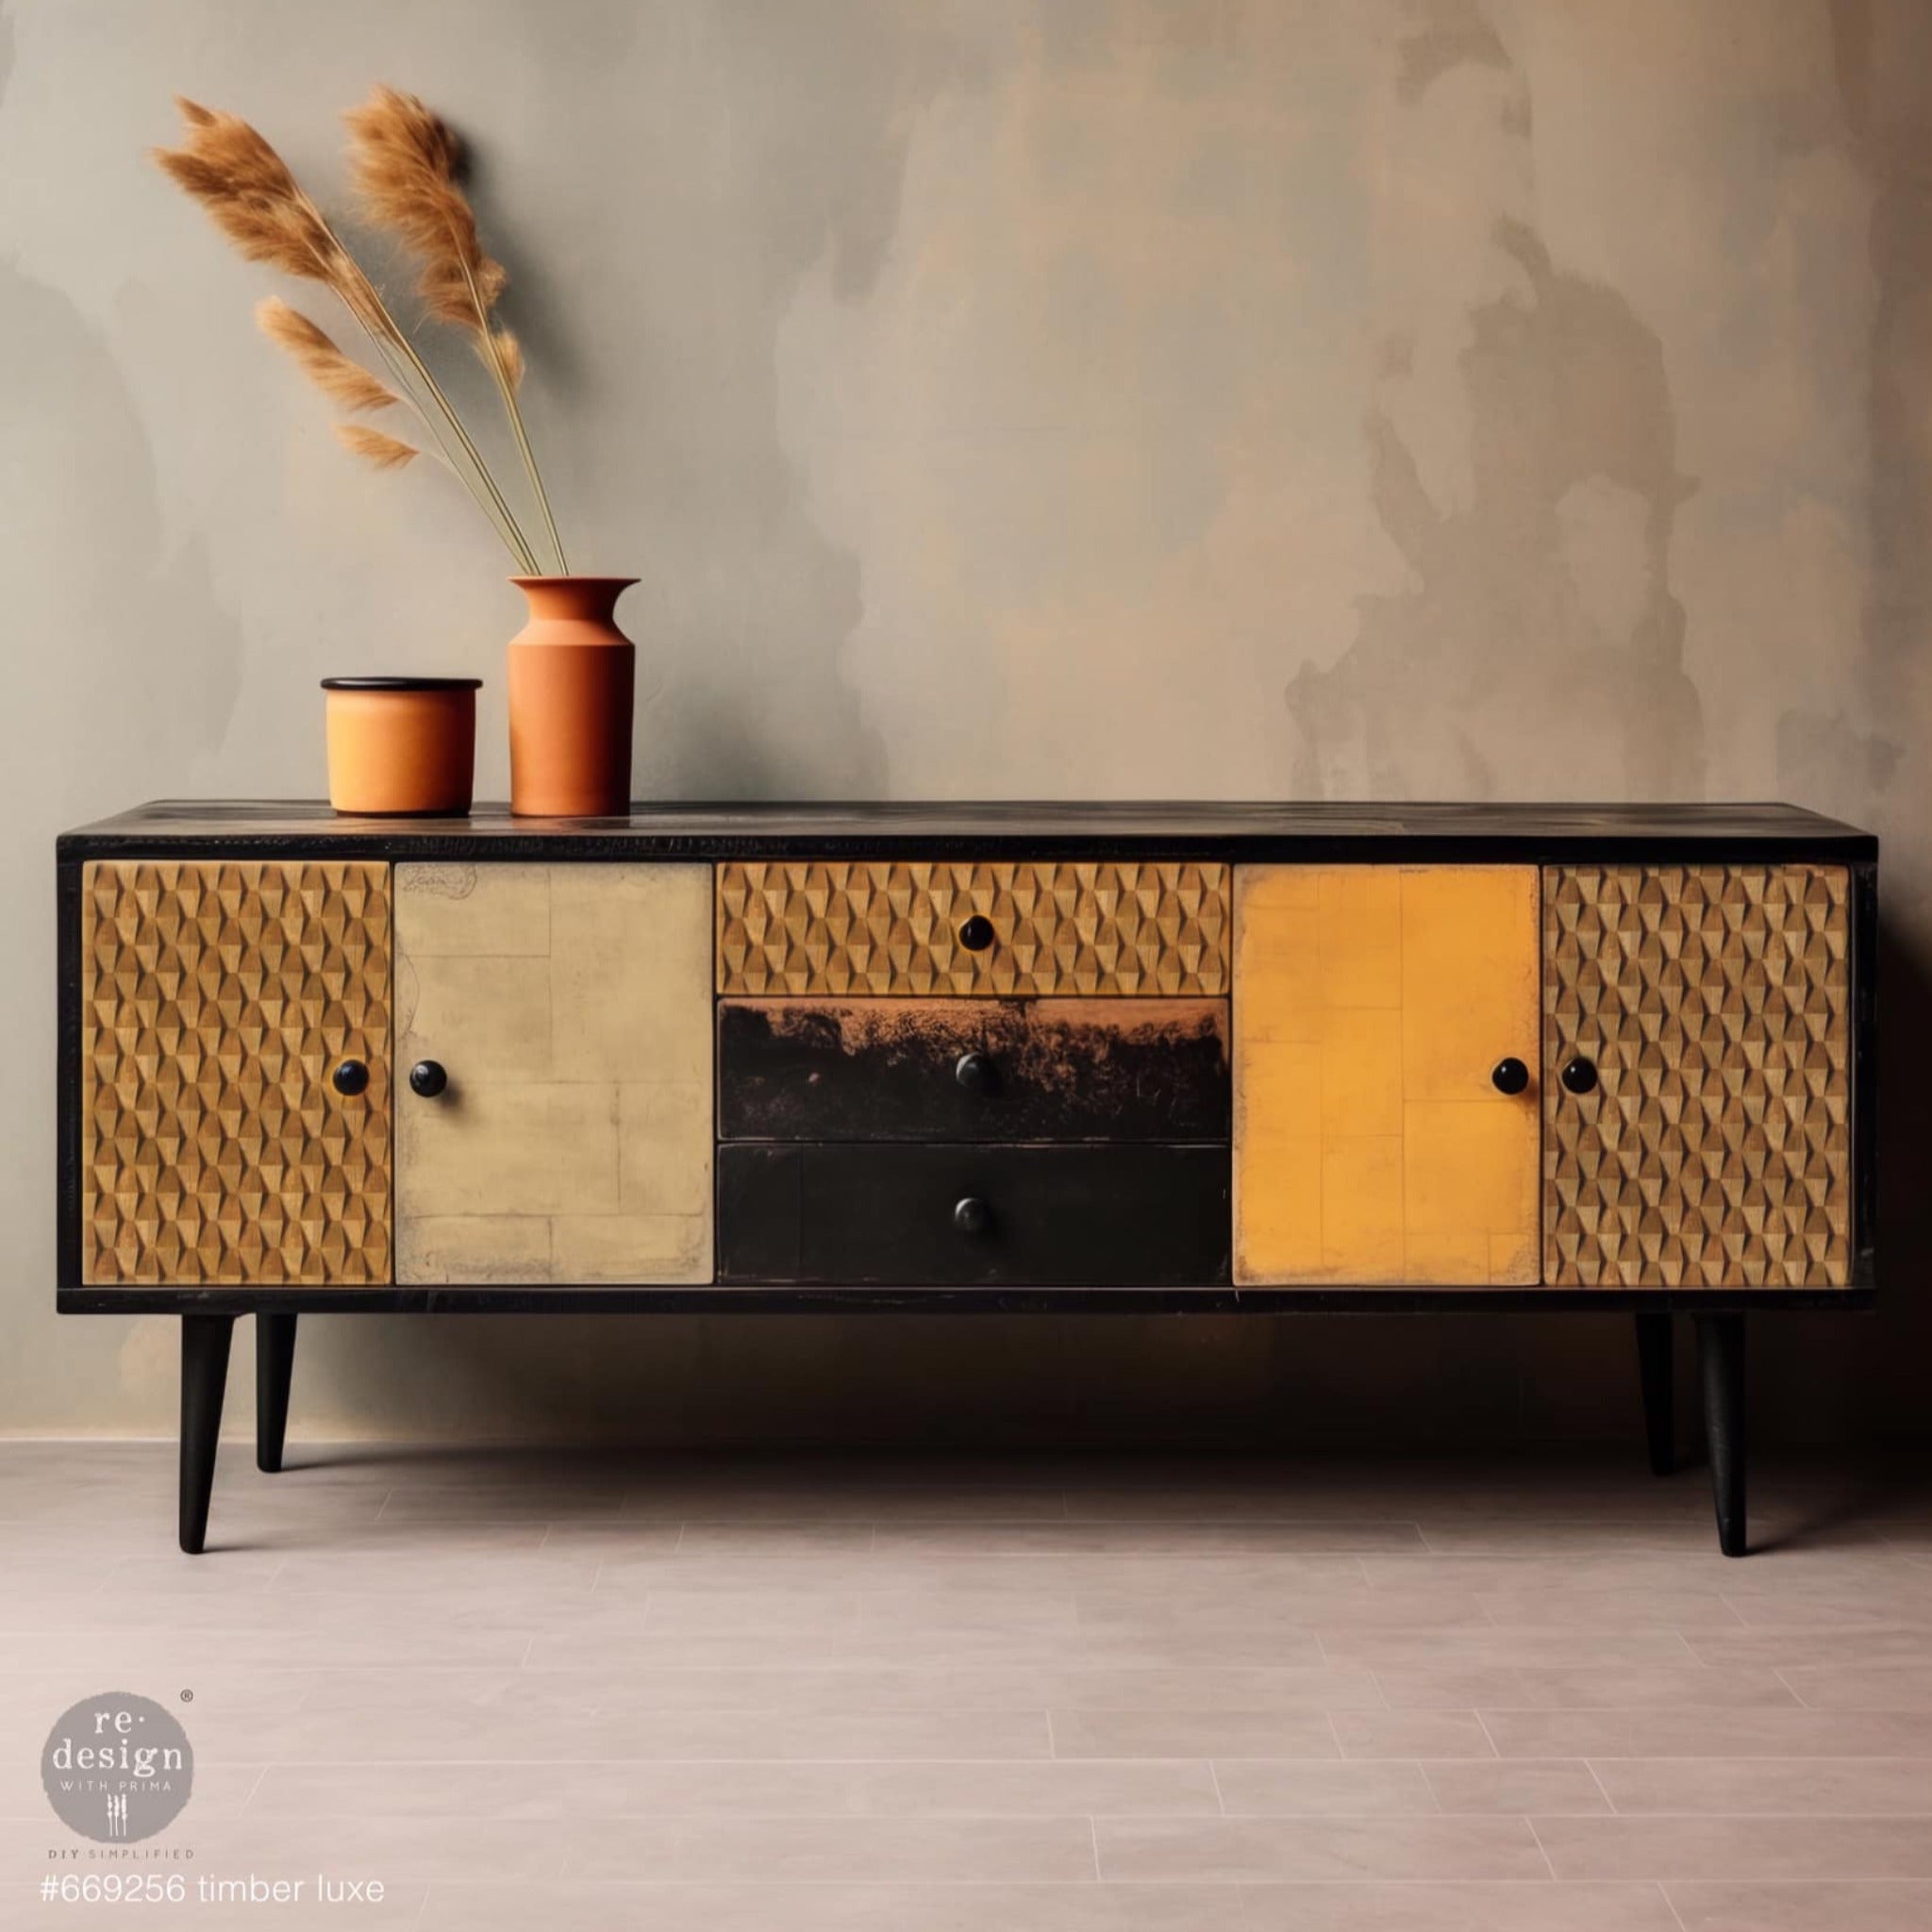 A mid-century TV console is painted black. Two doors and 1 drawer feature ReDesign with Prima's Timber Luxe A1 fiber paper on them. The other doors are painted 2 shades of amber yellow and the rest of the drawers are black.